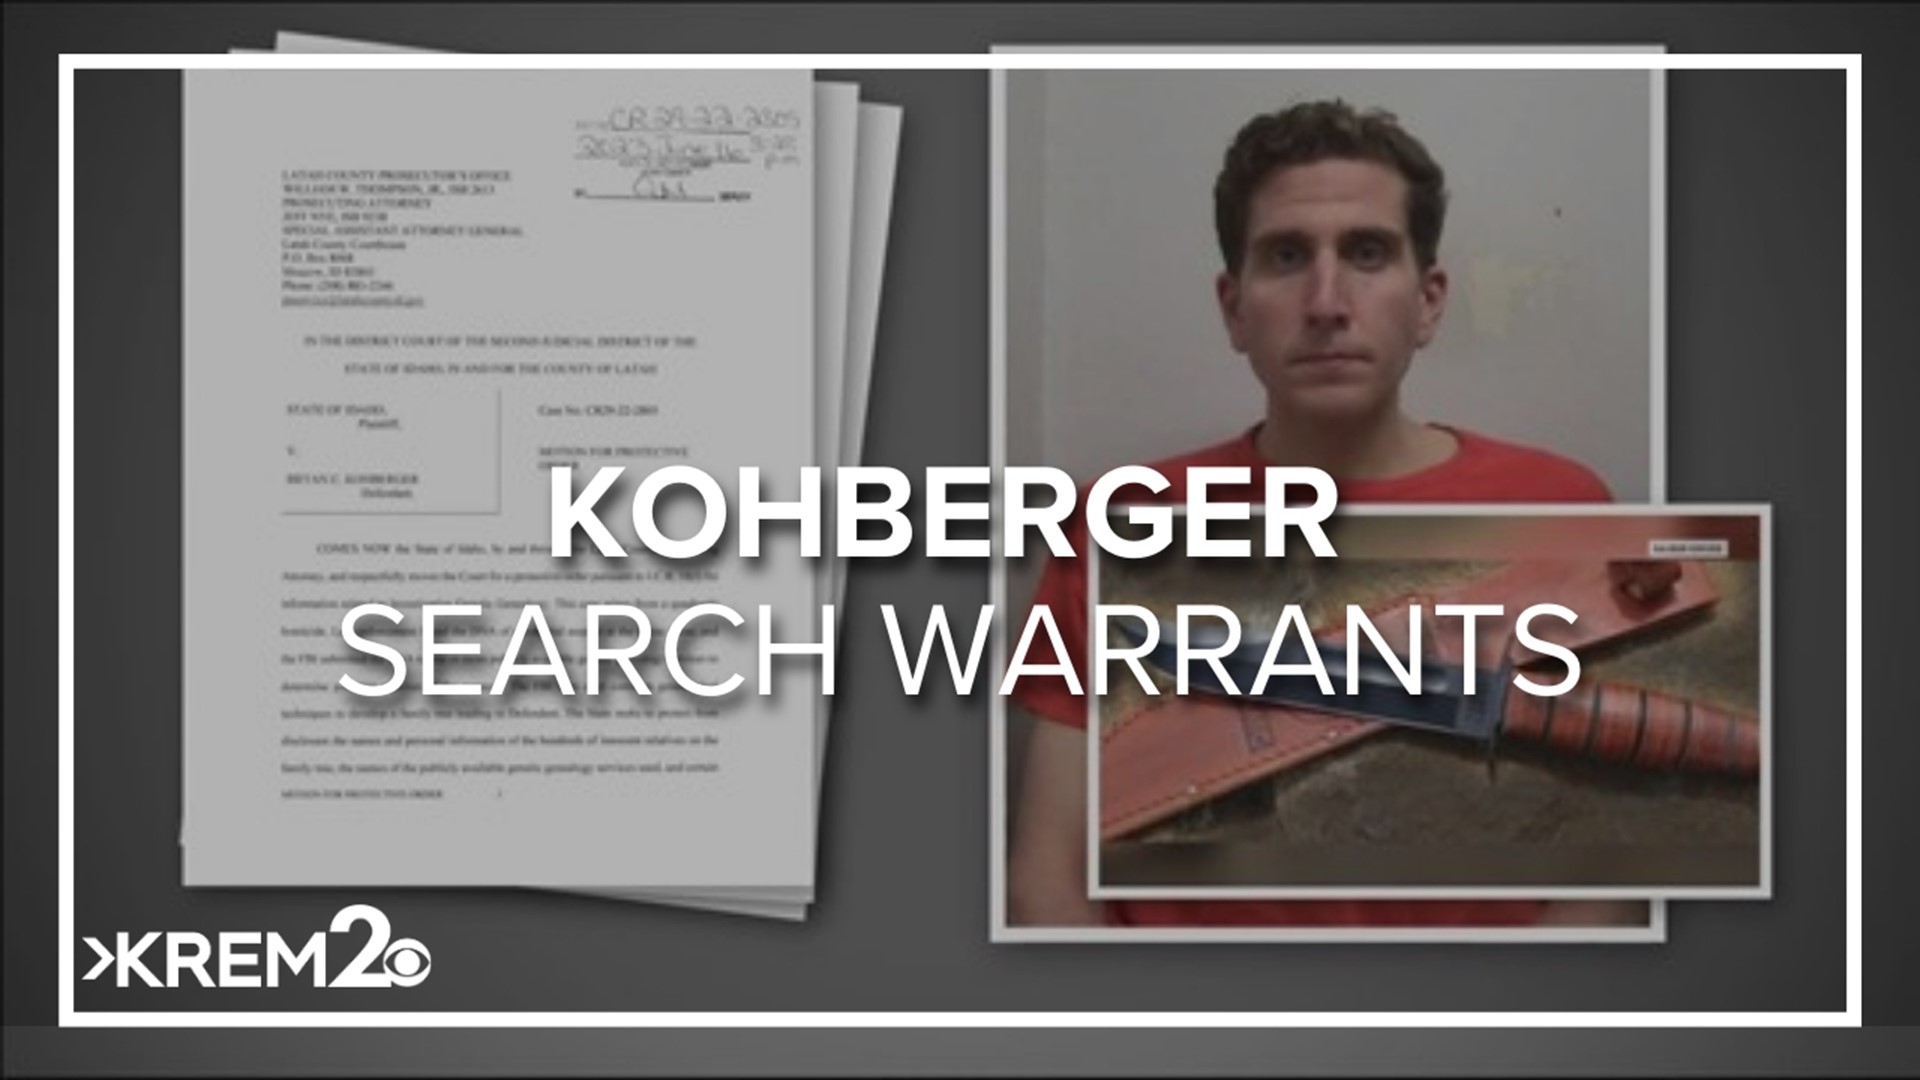 The documents show police are asking for customer information from both during the month of the murders, but also from months before Kohberger moved to Washington.